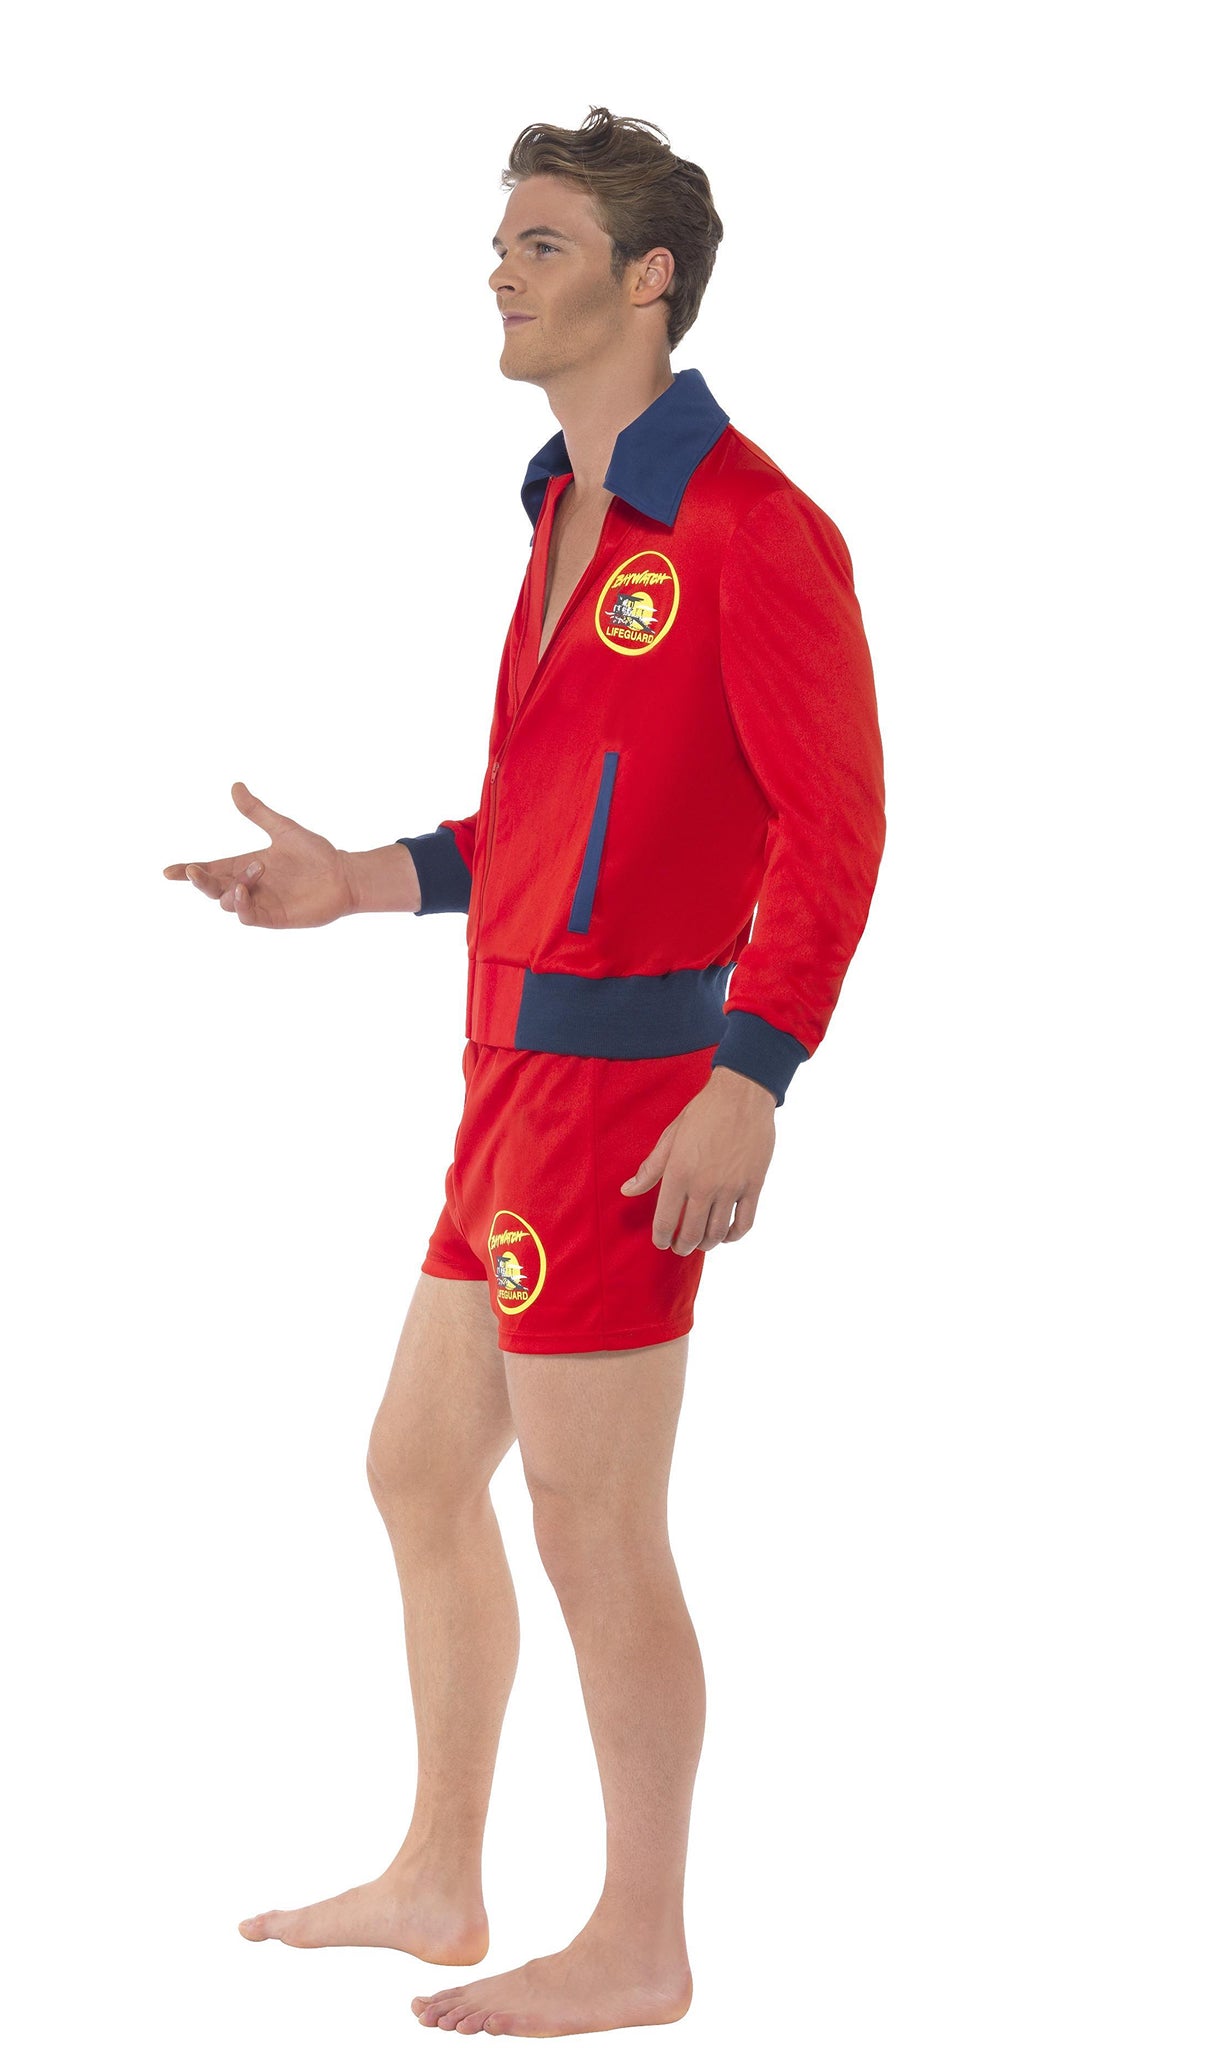 Side of red Baywatch lifeguard costume with jacket and shorts